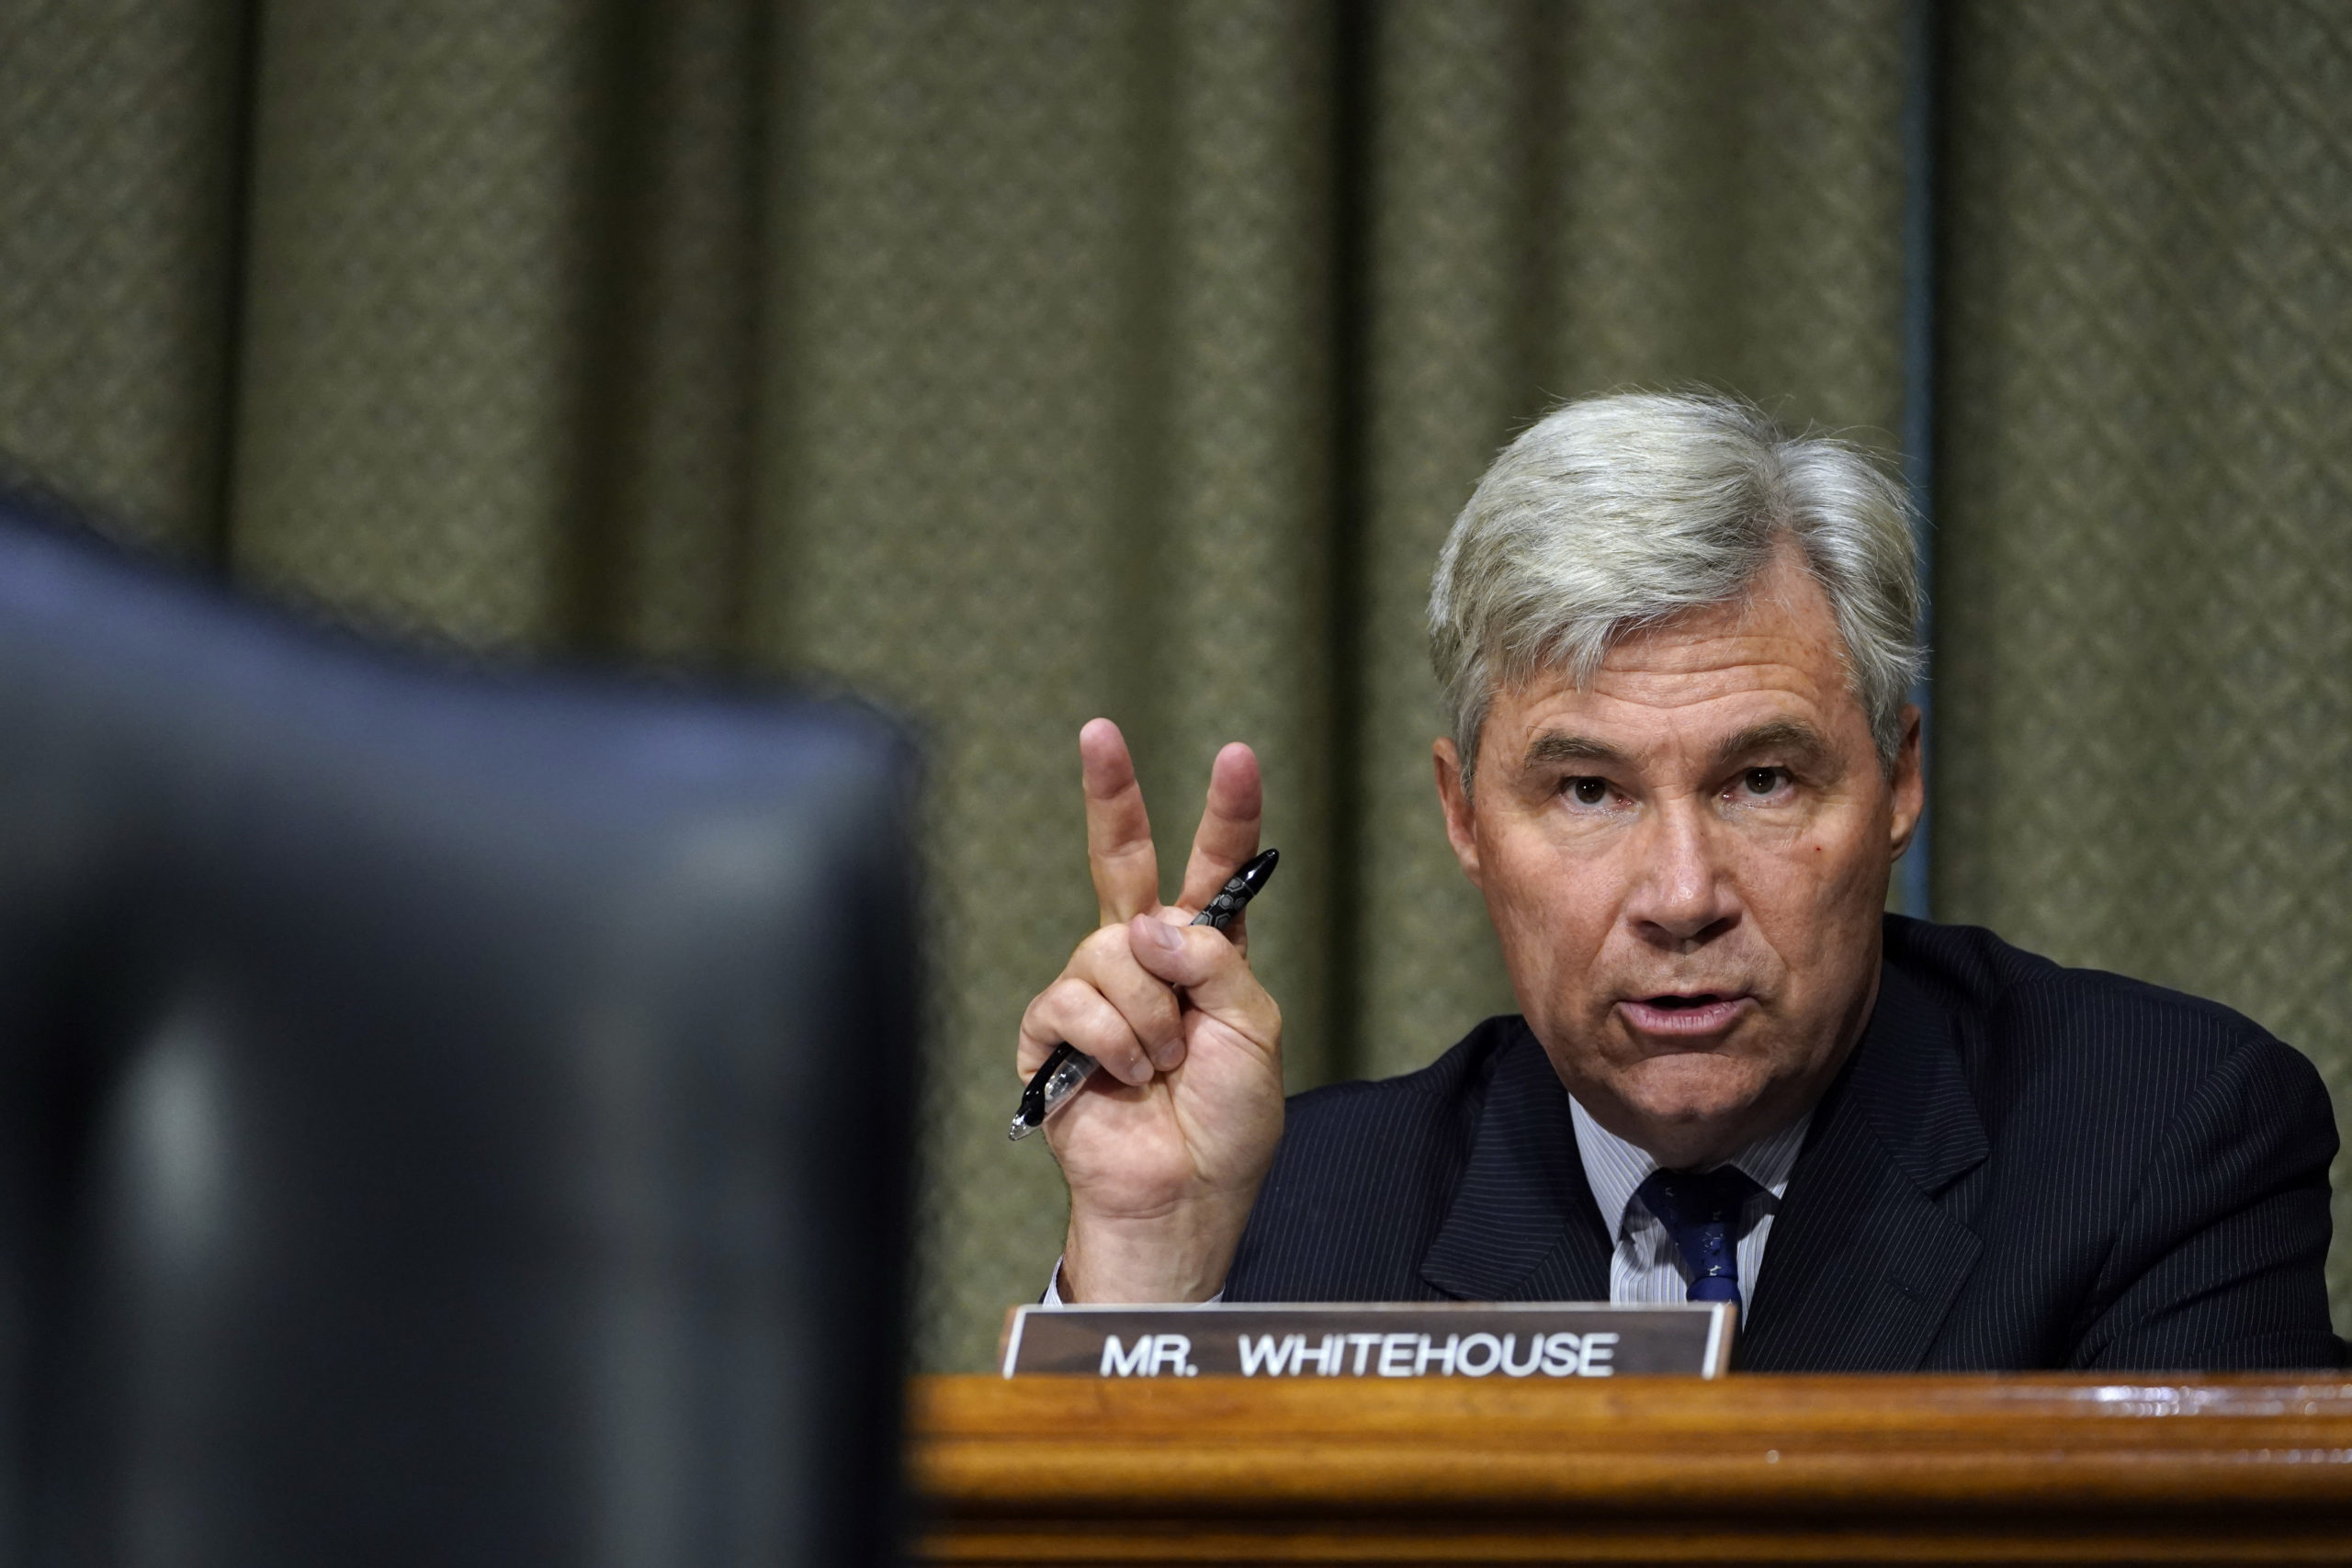 Sen. Sheldon Whitehouse speaks during a Senate Judiciary Committee hearing on Nov. 10. (Susan Walsh/Pool/Getty Images)